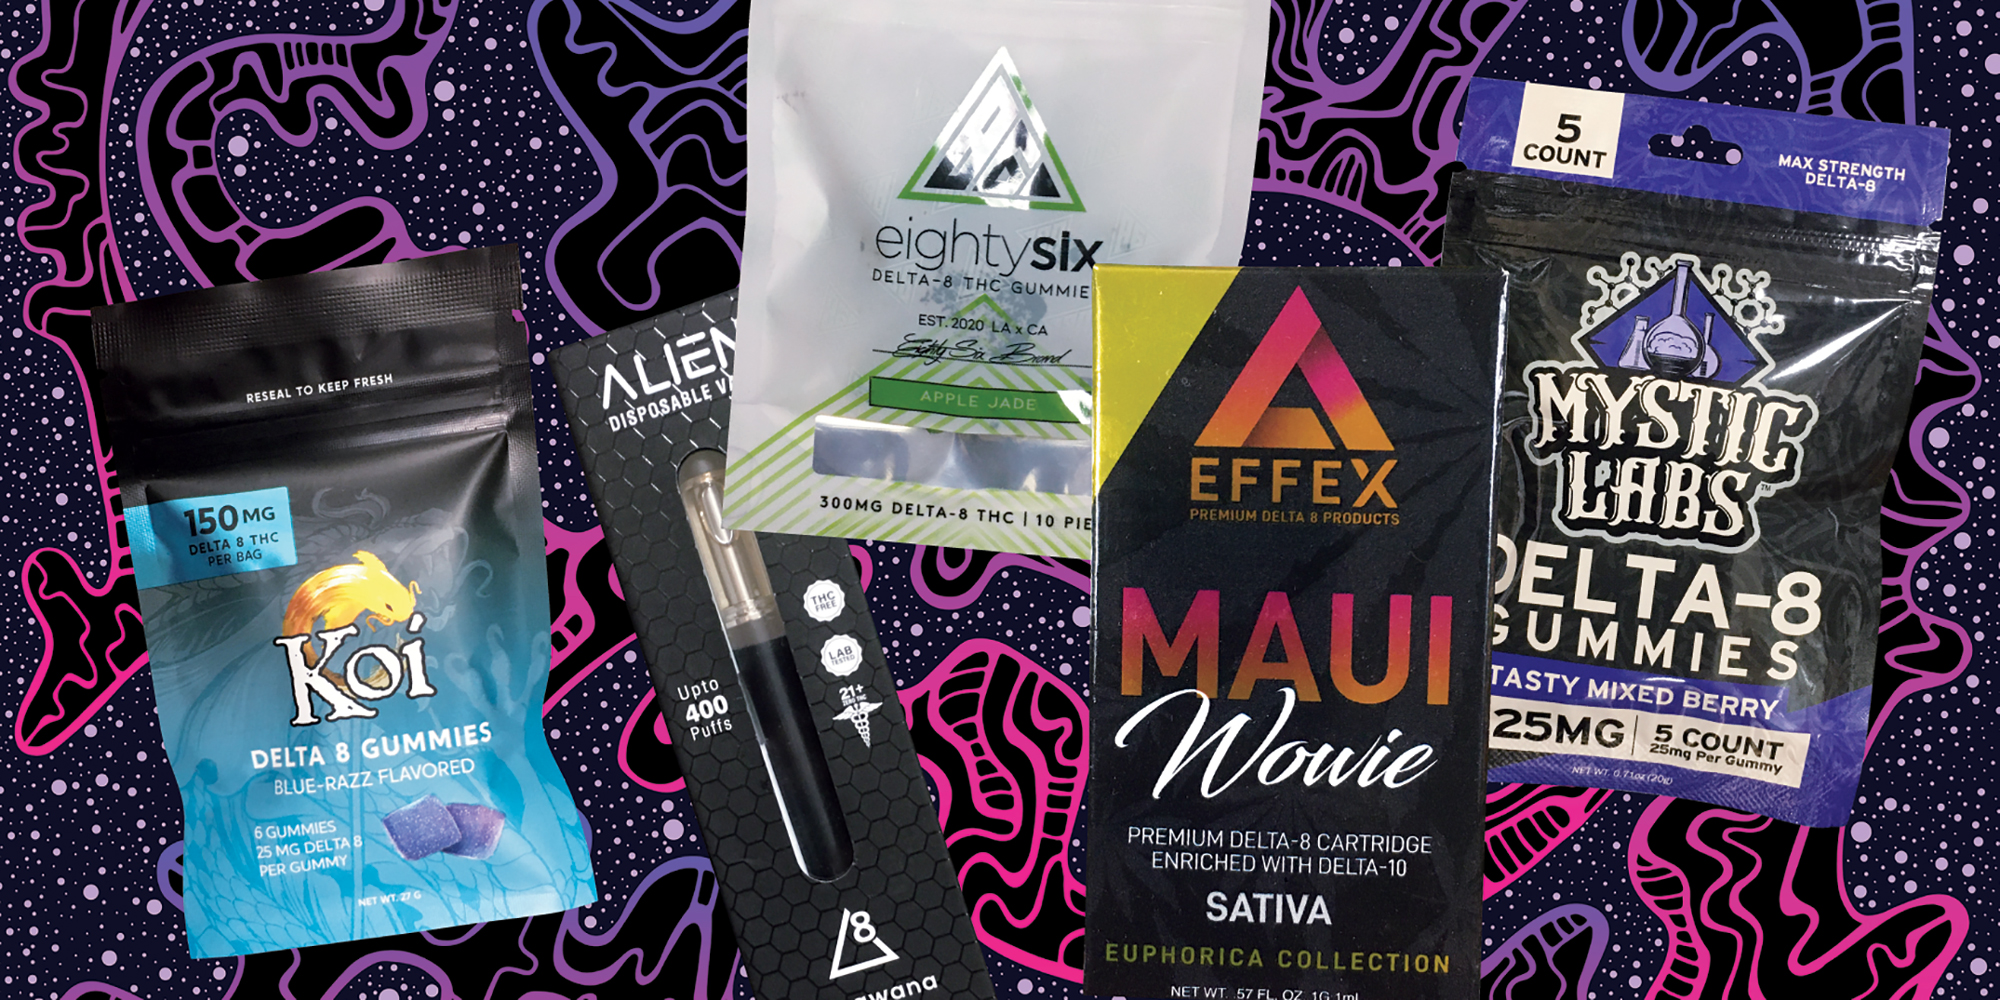 HOW LONG FOR DELTA 8 EDIBLES TO KICK IN - Gummies|Thc|Products|Hemp|Product|Brand|Effects|Delta|Gummy|Cbd|Origin|Quality|Dosage|Delta-8|Dose|Usasource|Flavors|Brands|Ingredients|Range|Customers|Edibles|Cartridges|Reviews|Side|List|Health|Cannabis|Lab|Customer|Options|Benefits|Overviewproducts|Research|Time|Market|Drug|Farms|Party|People|Delta-8 Thc|Delta-8 Products|Delta-9 Thc|Delta-8 Gummies|Delta-8 Thc Products|Delta-8 Brands|Customer Reviews|Brand Overviewproducts|Drug Tests|Free Shipping|Similar Benefits|Vape Cartridges|Hemp Doctor|United States|Third Party Lab|Drug Test|Thc Edibles|Health Canada|Cannabis Plant|Side Effects|Organic Hemp|Diamond Cbd|Reaction Time|Legal Hemp|Psychoactive Effects|Psychoactive Properties|Third Party|Dry Eyes|Delta-8 Market|Tolerance Level